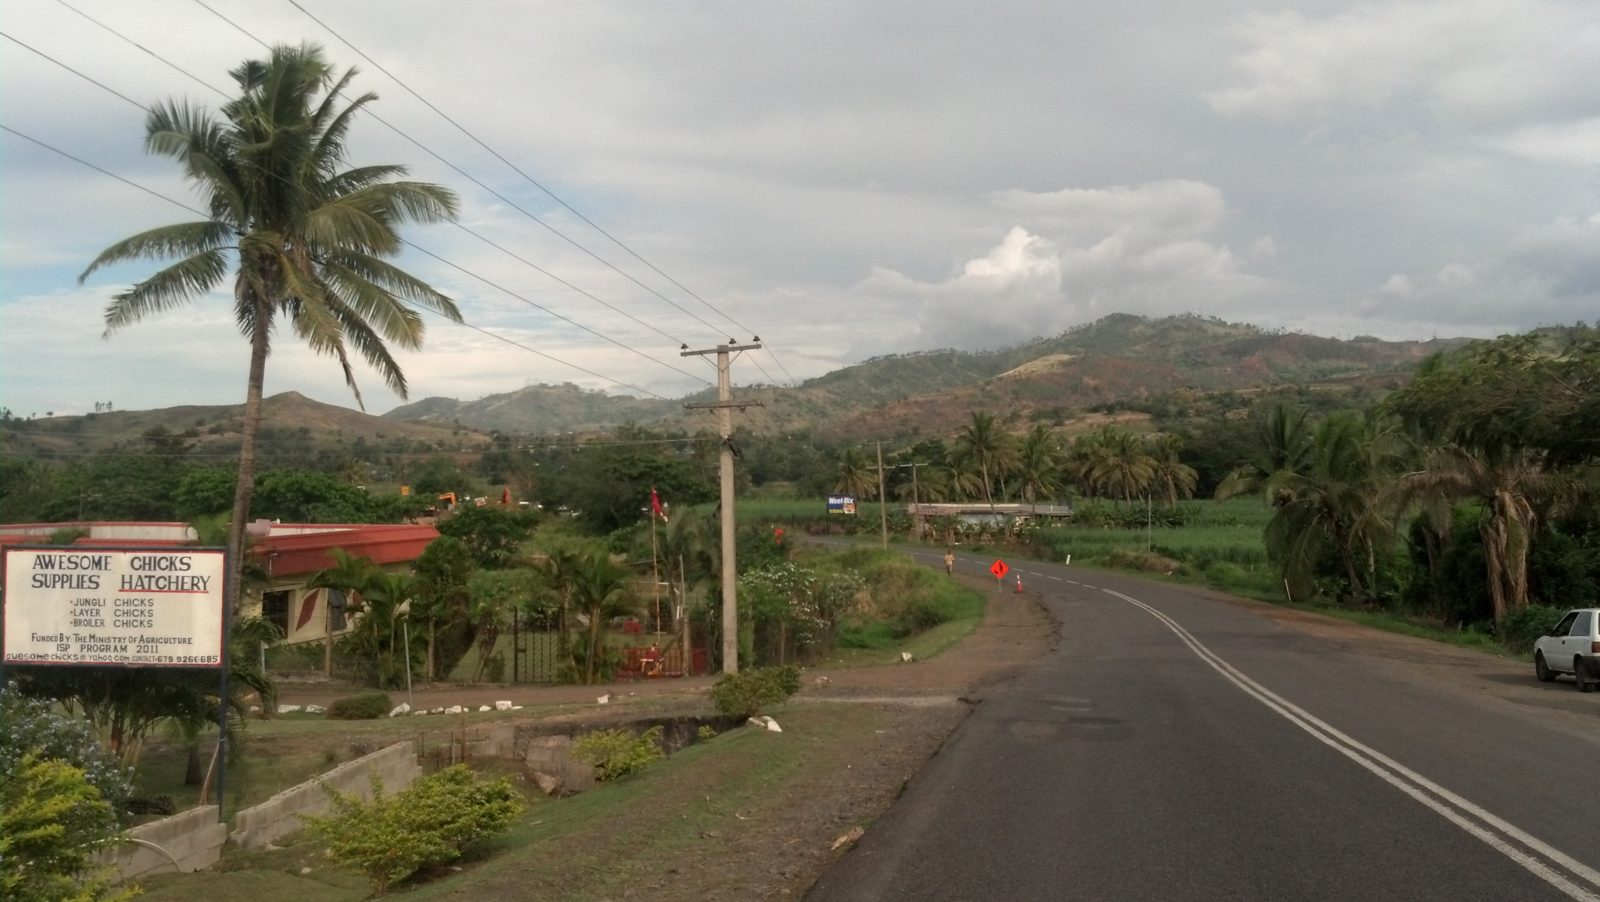 A road in the Pacific Islands, the sky is cloudy and a palm tree stands at the side of the road.